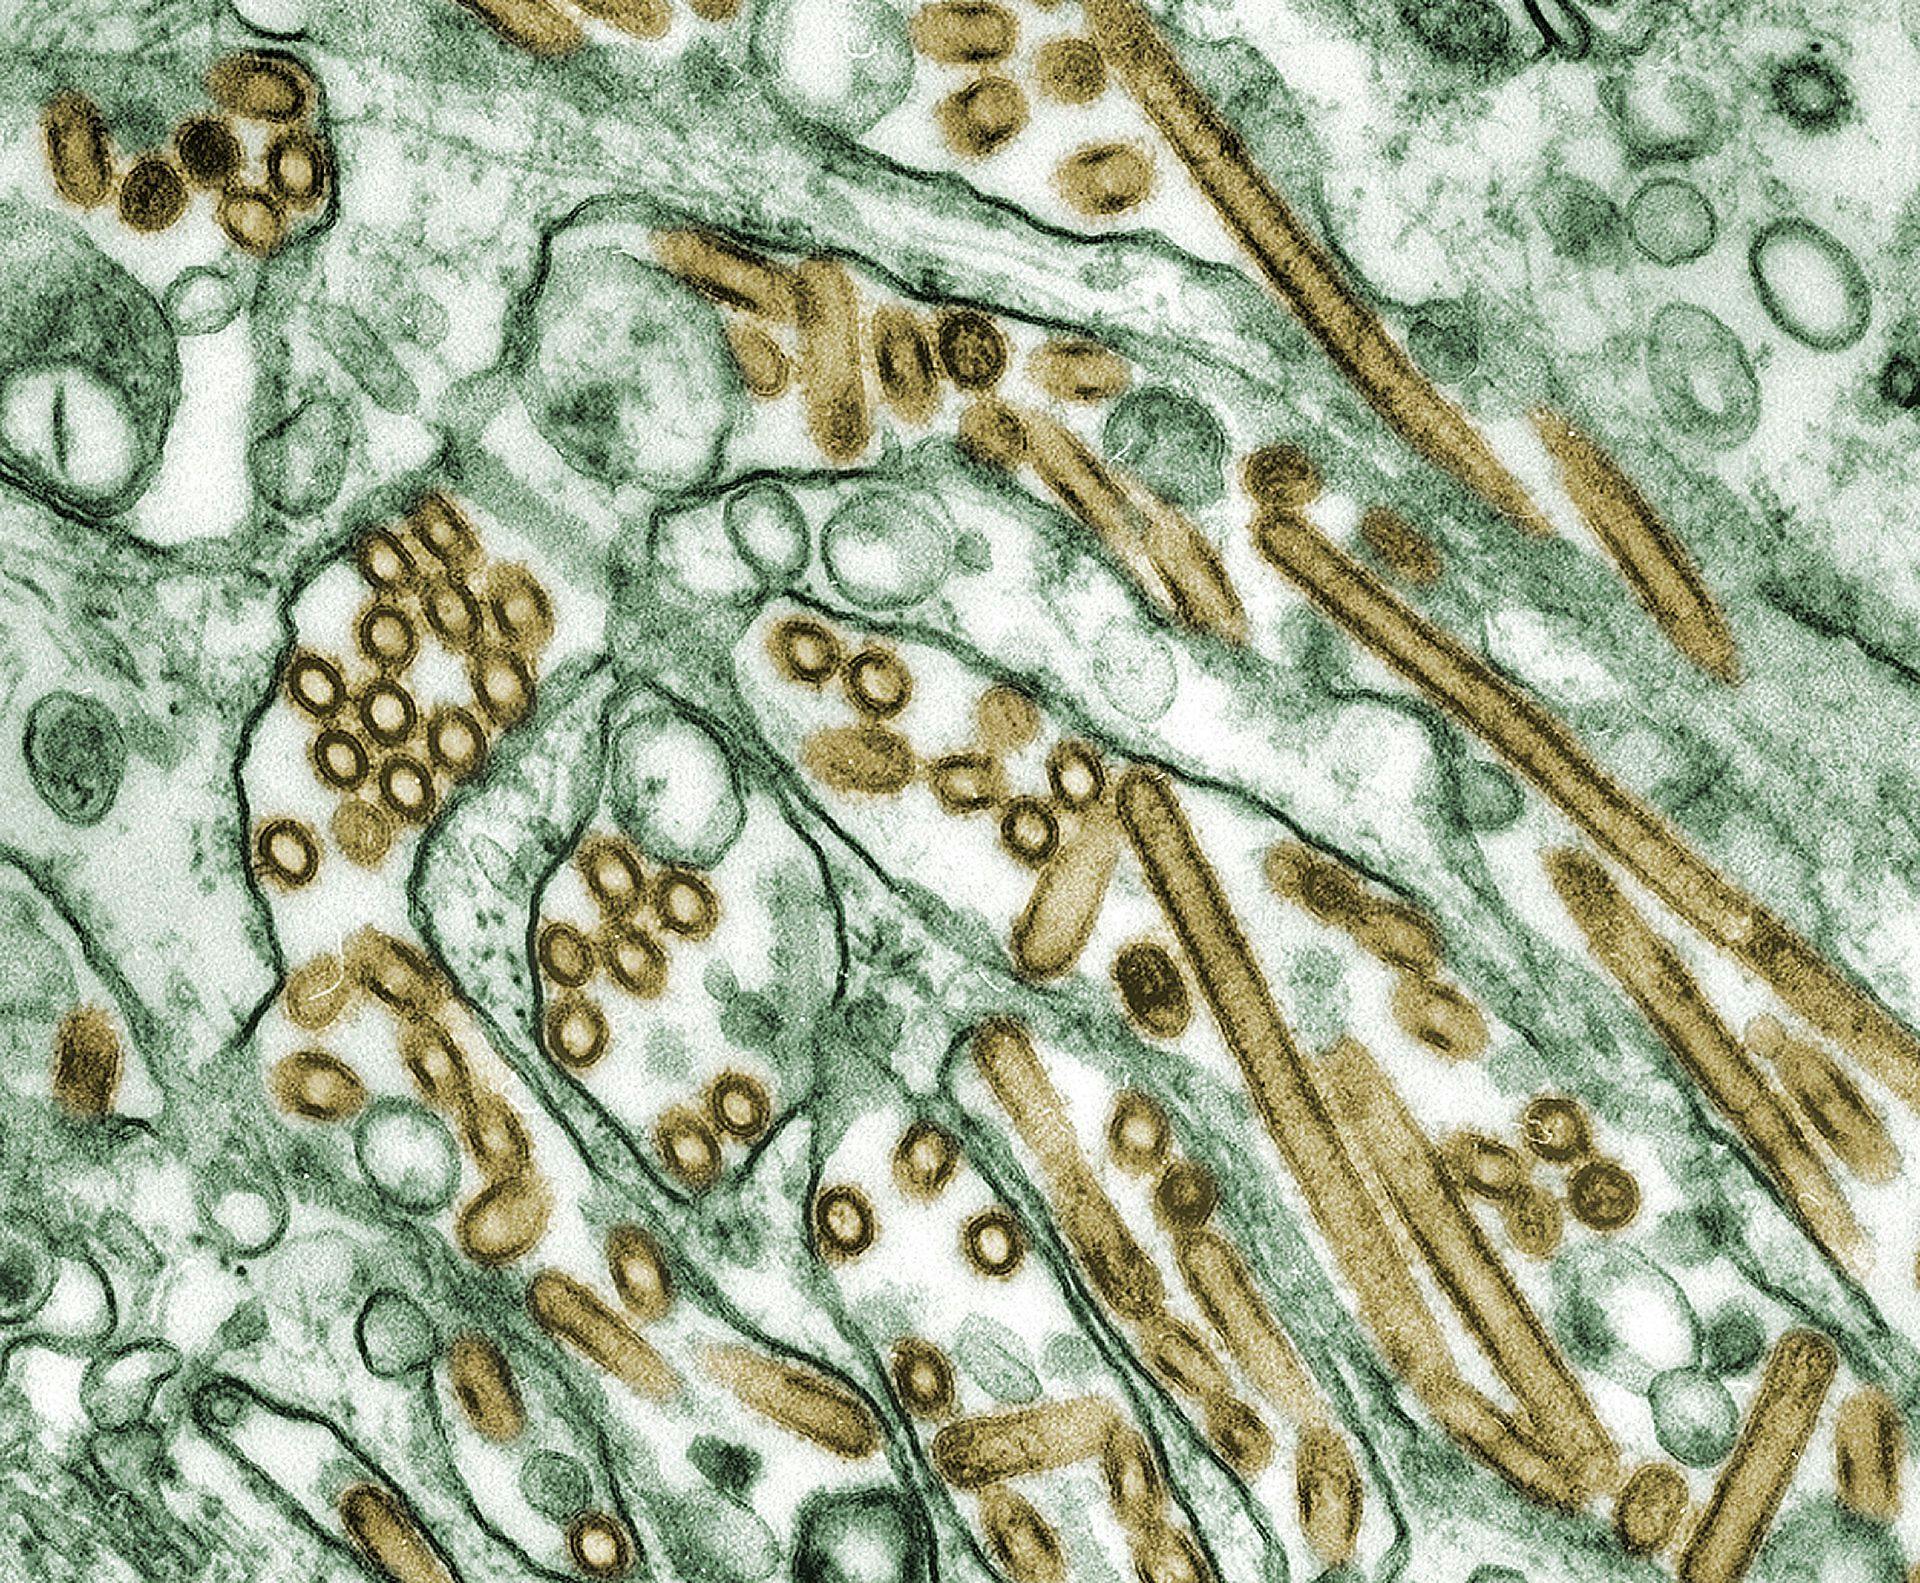 Colorized transmission electron micrograph of Avian influenza A H5N1 viruses (seen in gold) grown in MDCK cells (seen in green).

Photo Credit: Cynthia Goldsmith Content Providers: CDC/ Courtesy of Cynthia Goldsmith; Jacqueline Katz; Sherif R. Zaki